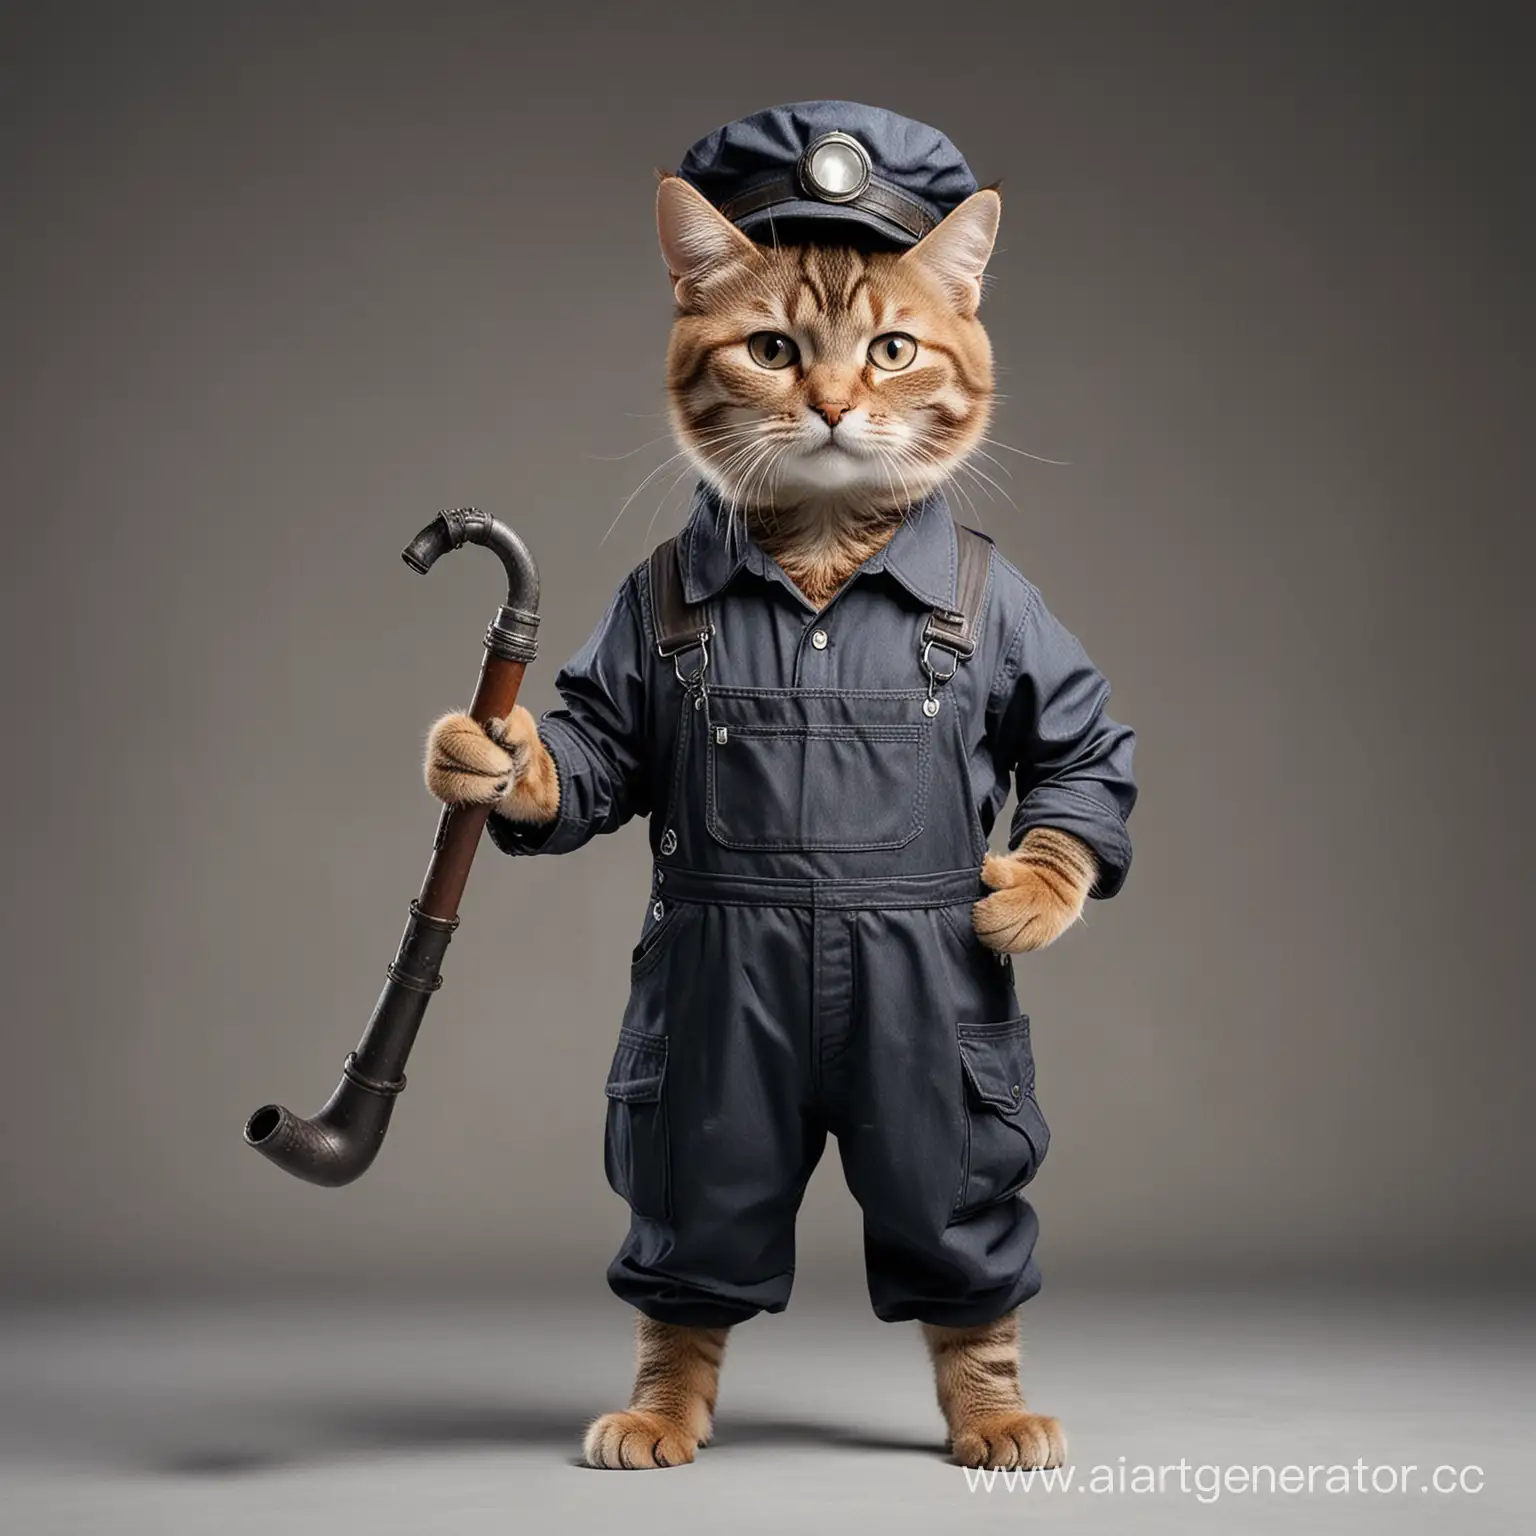 Whimsical-Cat-Mechanic-Poses-in-Professional-Photo-Shoot